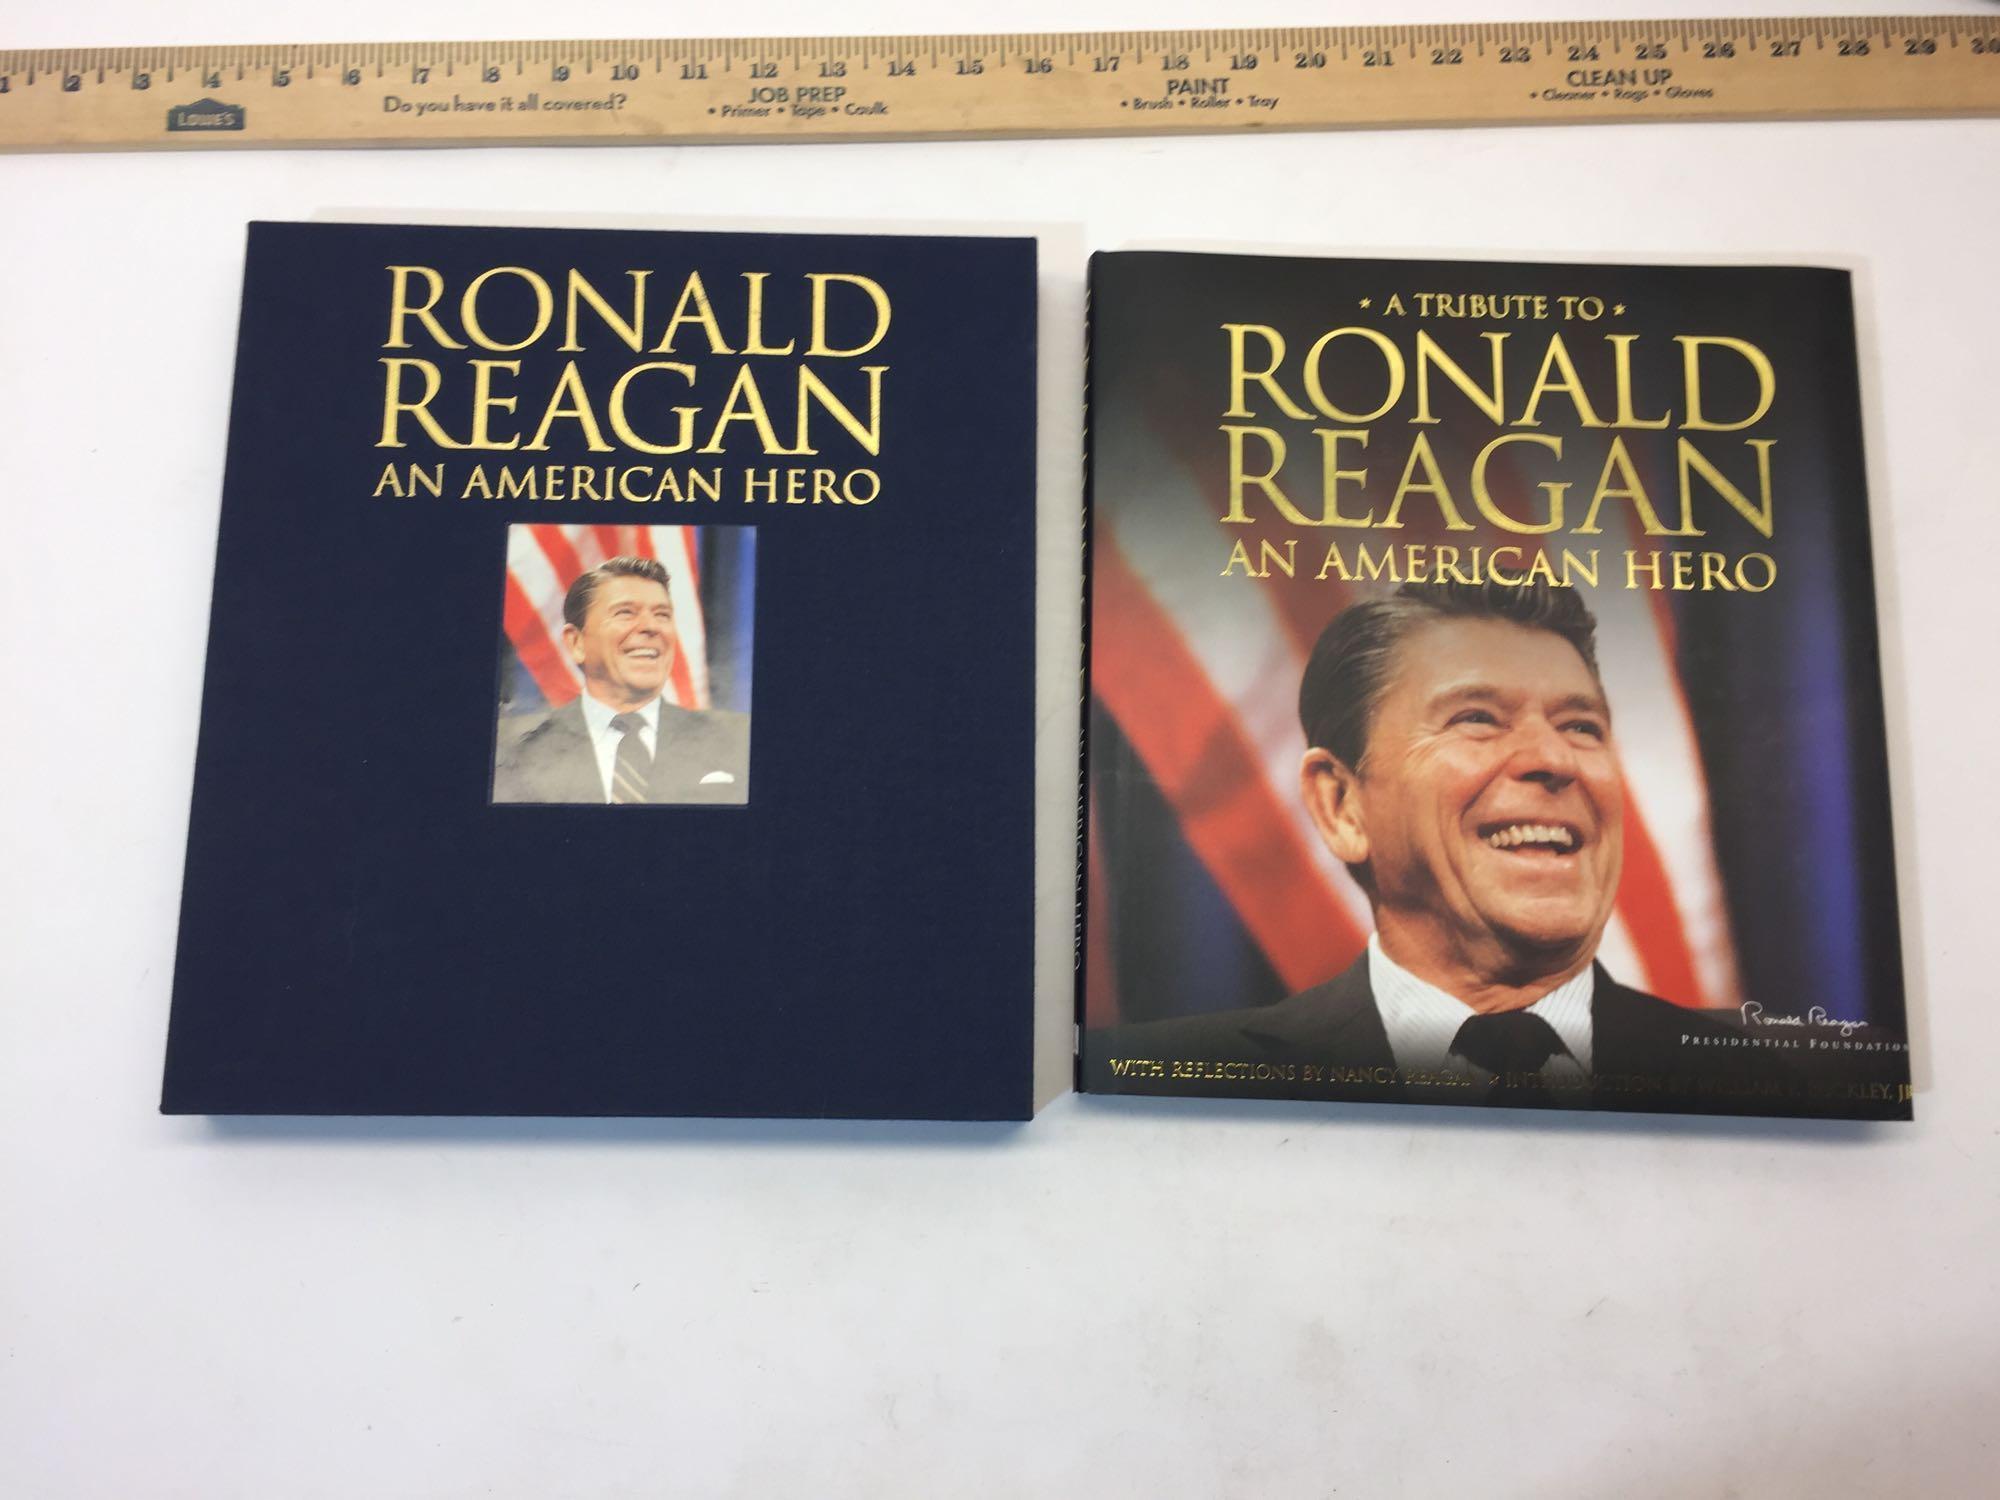 Commendations and Ronald Reagan Biography